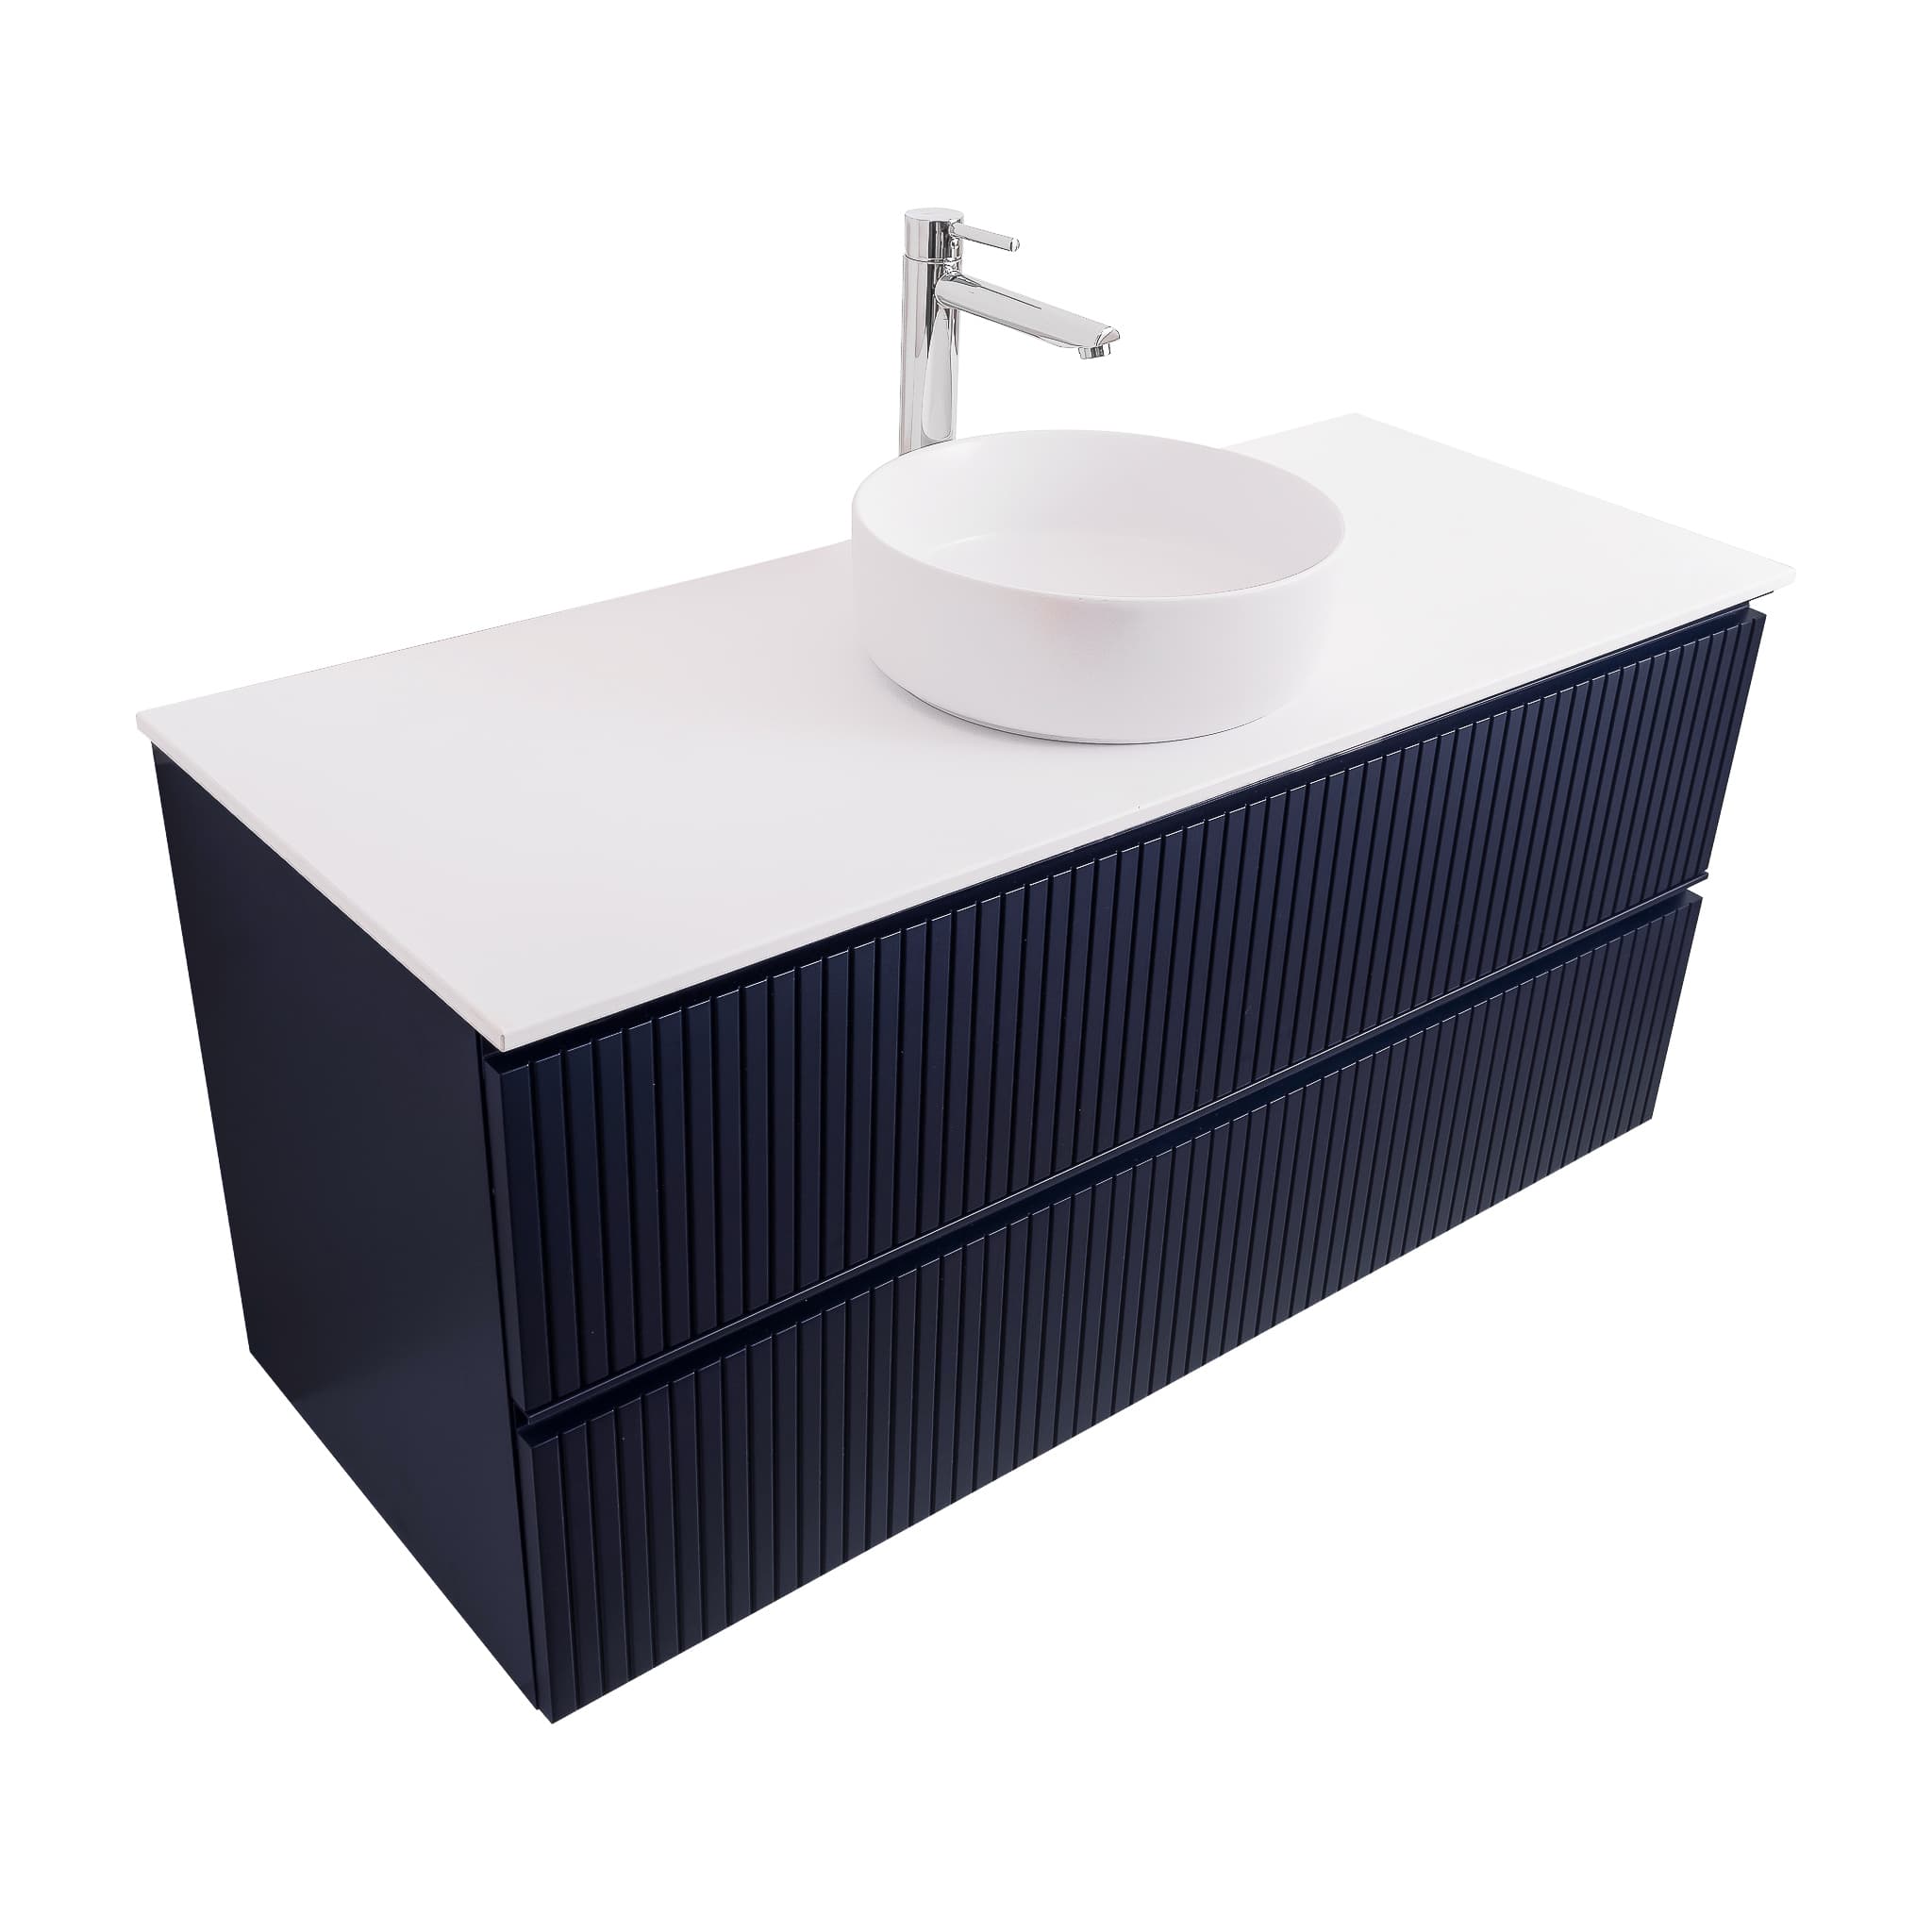 Ares 47.5 Matte Navy Blue Cabinet, Ares White Top And Ares White Ceramic Basin, Wall Mounted Modern Vanity Set